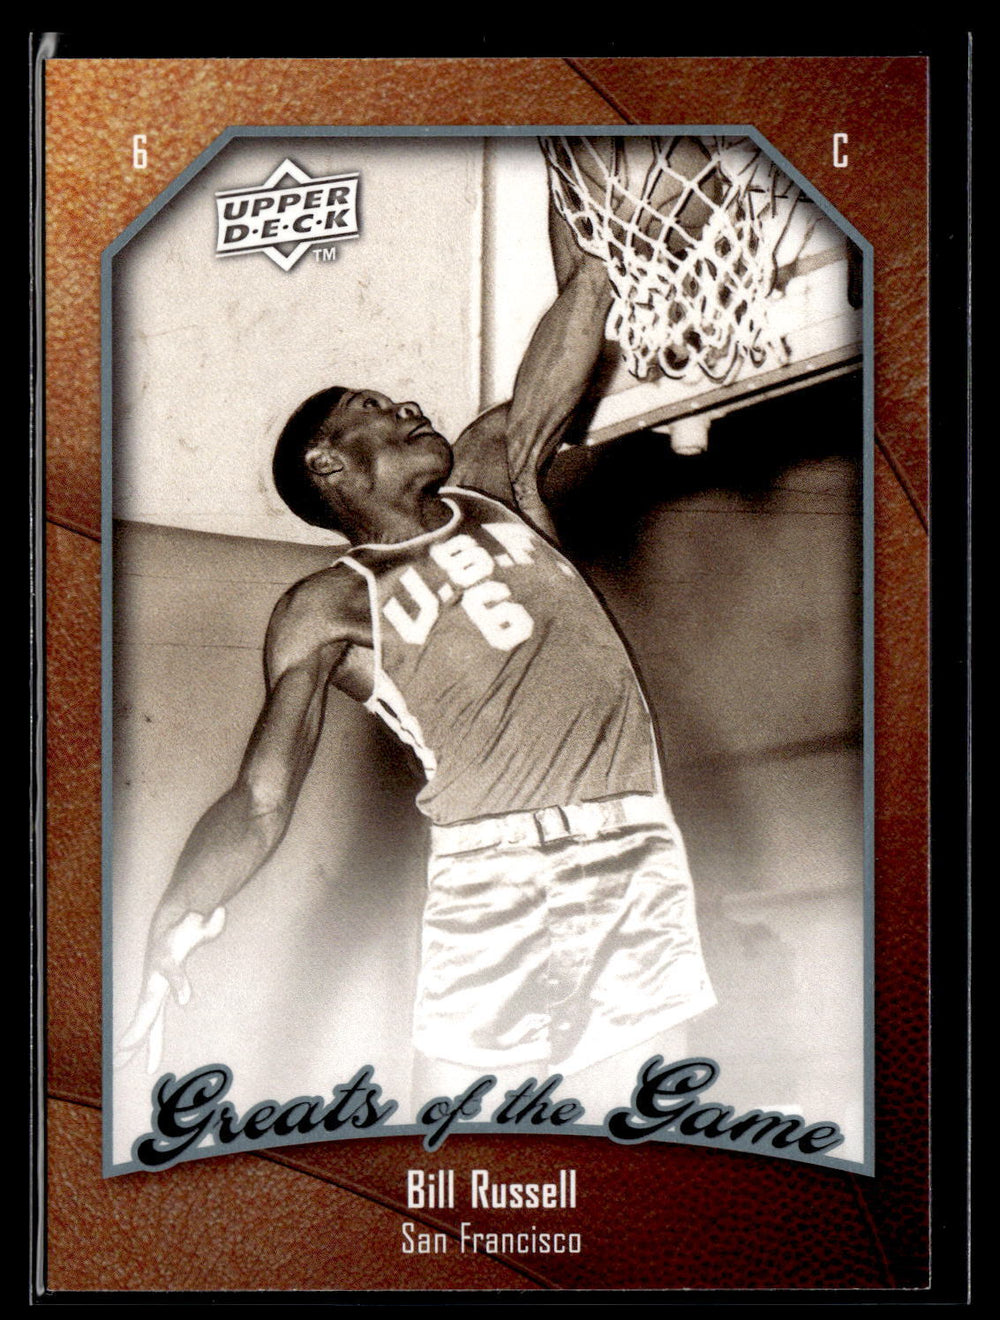 Bill Russell 2010 Upper Deck Greats of the Game Series Mint Card #66